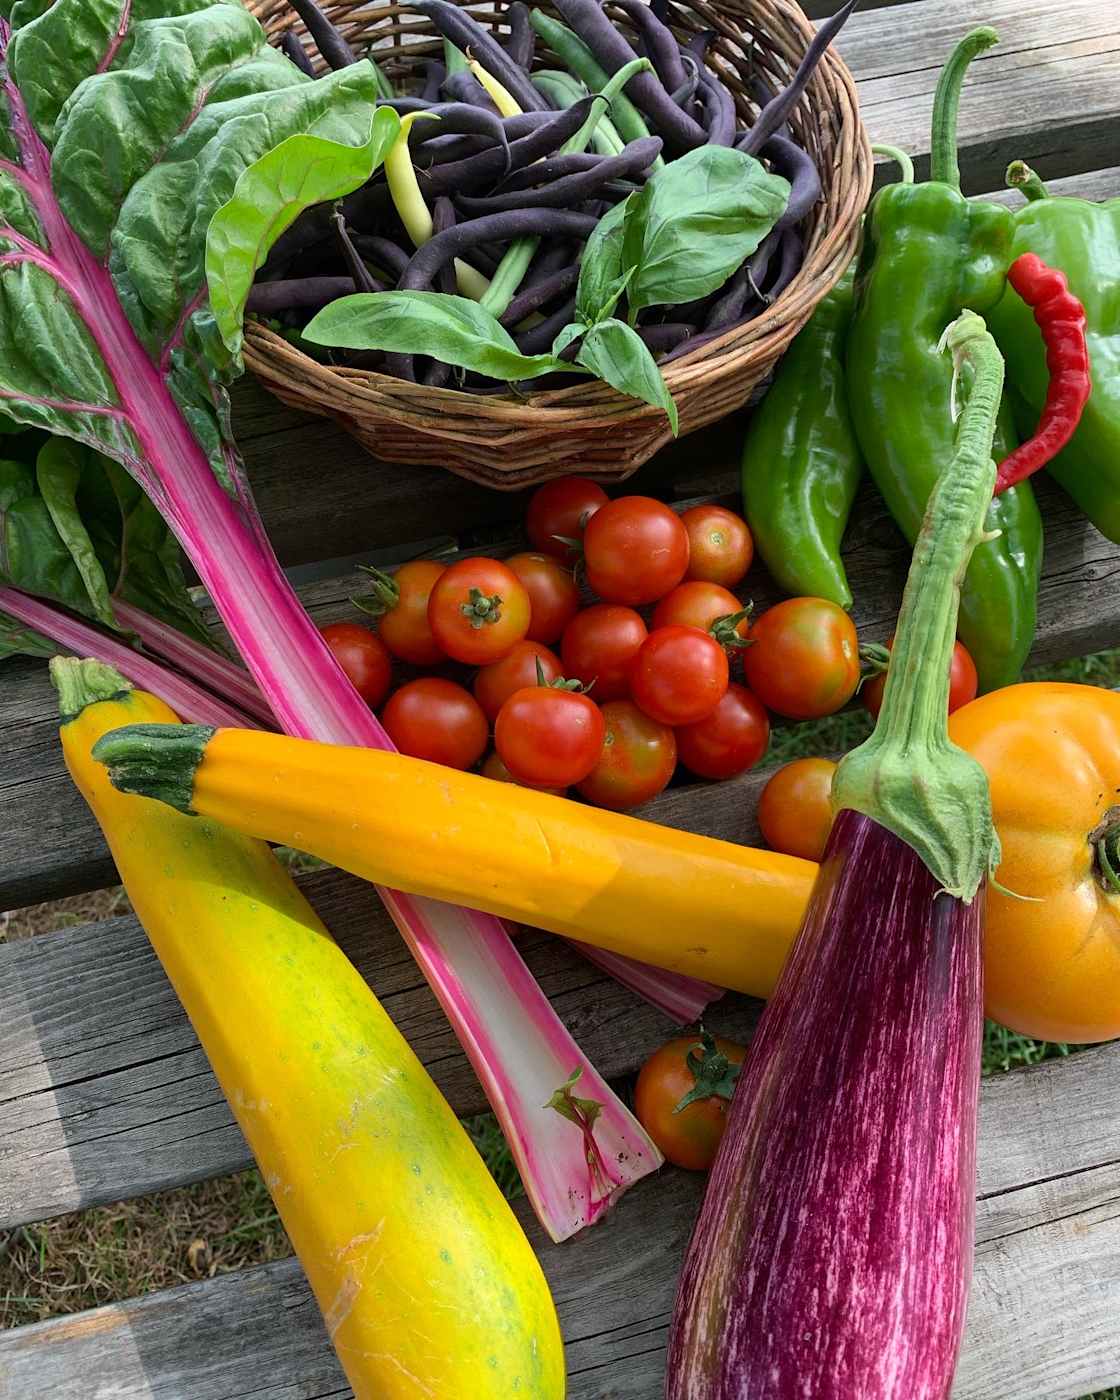 A wide variety of Organic vegetables, flowers, fruits, and herbs are grown at the farm. Each camper receives a small thank you basket containing what’s in season! 